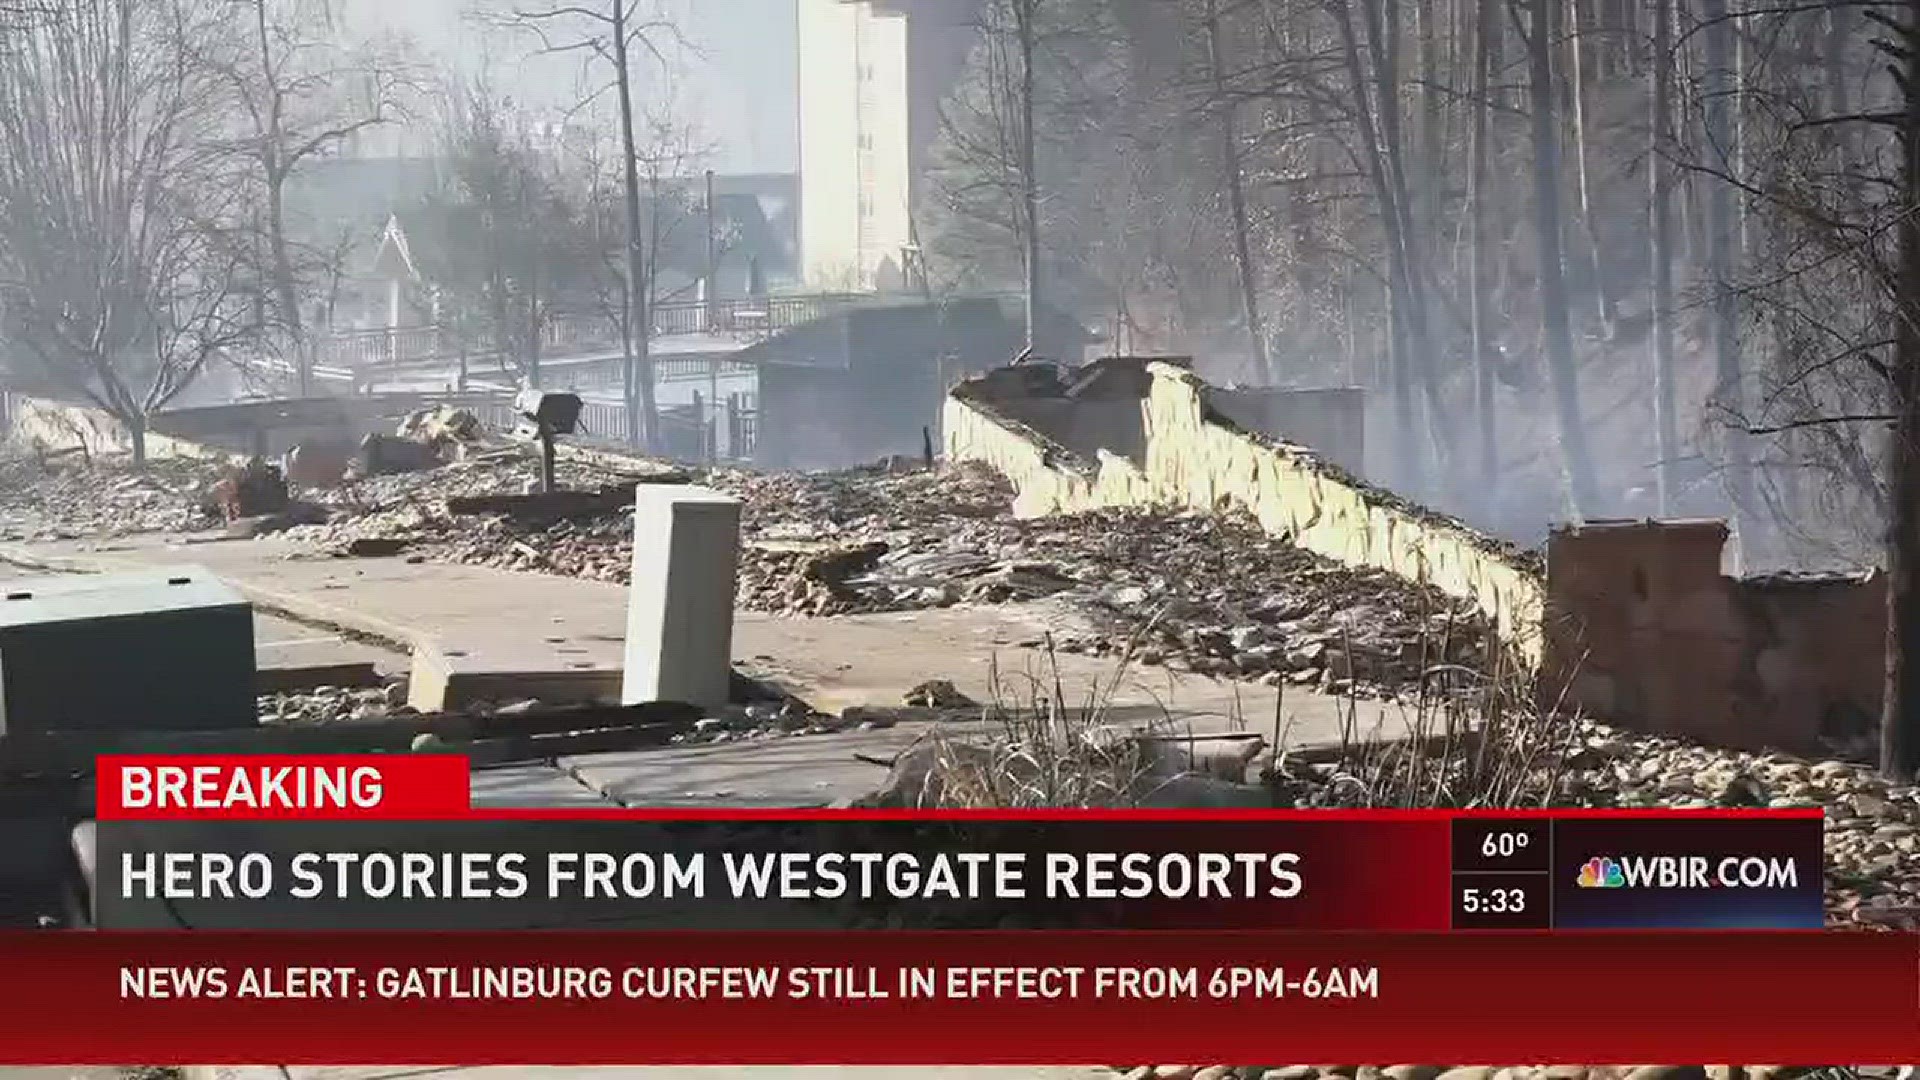 Many homes were destroyed in the Westgate Resorts in Gatilnburg, but everyone staying there escaped, thanks in part to the efforts of several heroes